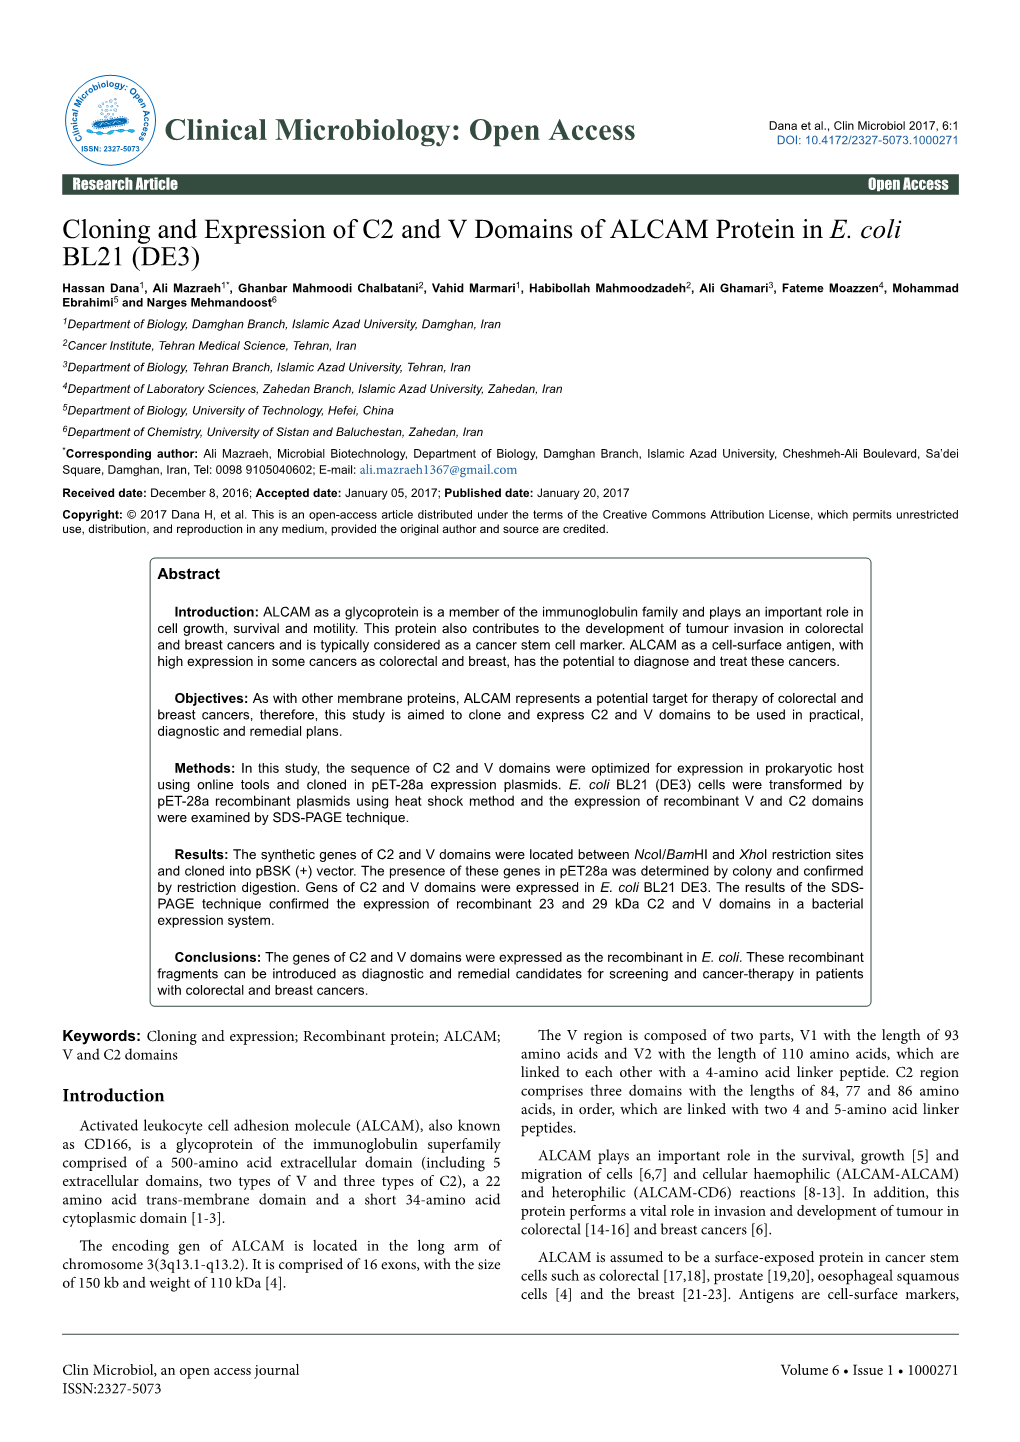 Cloning and Expression of C2 and V Domains of ALCAM Protein in E